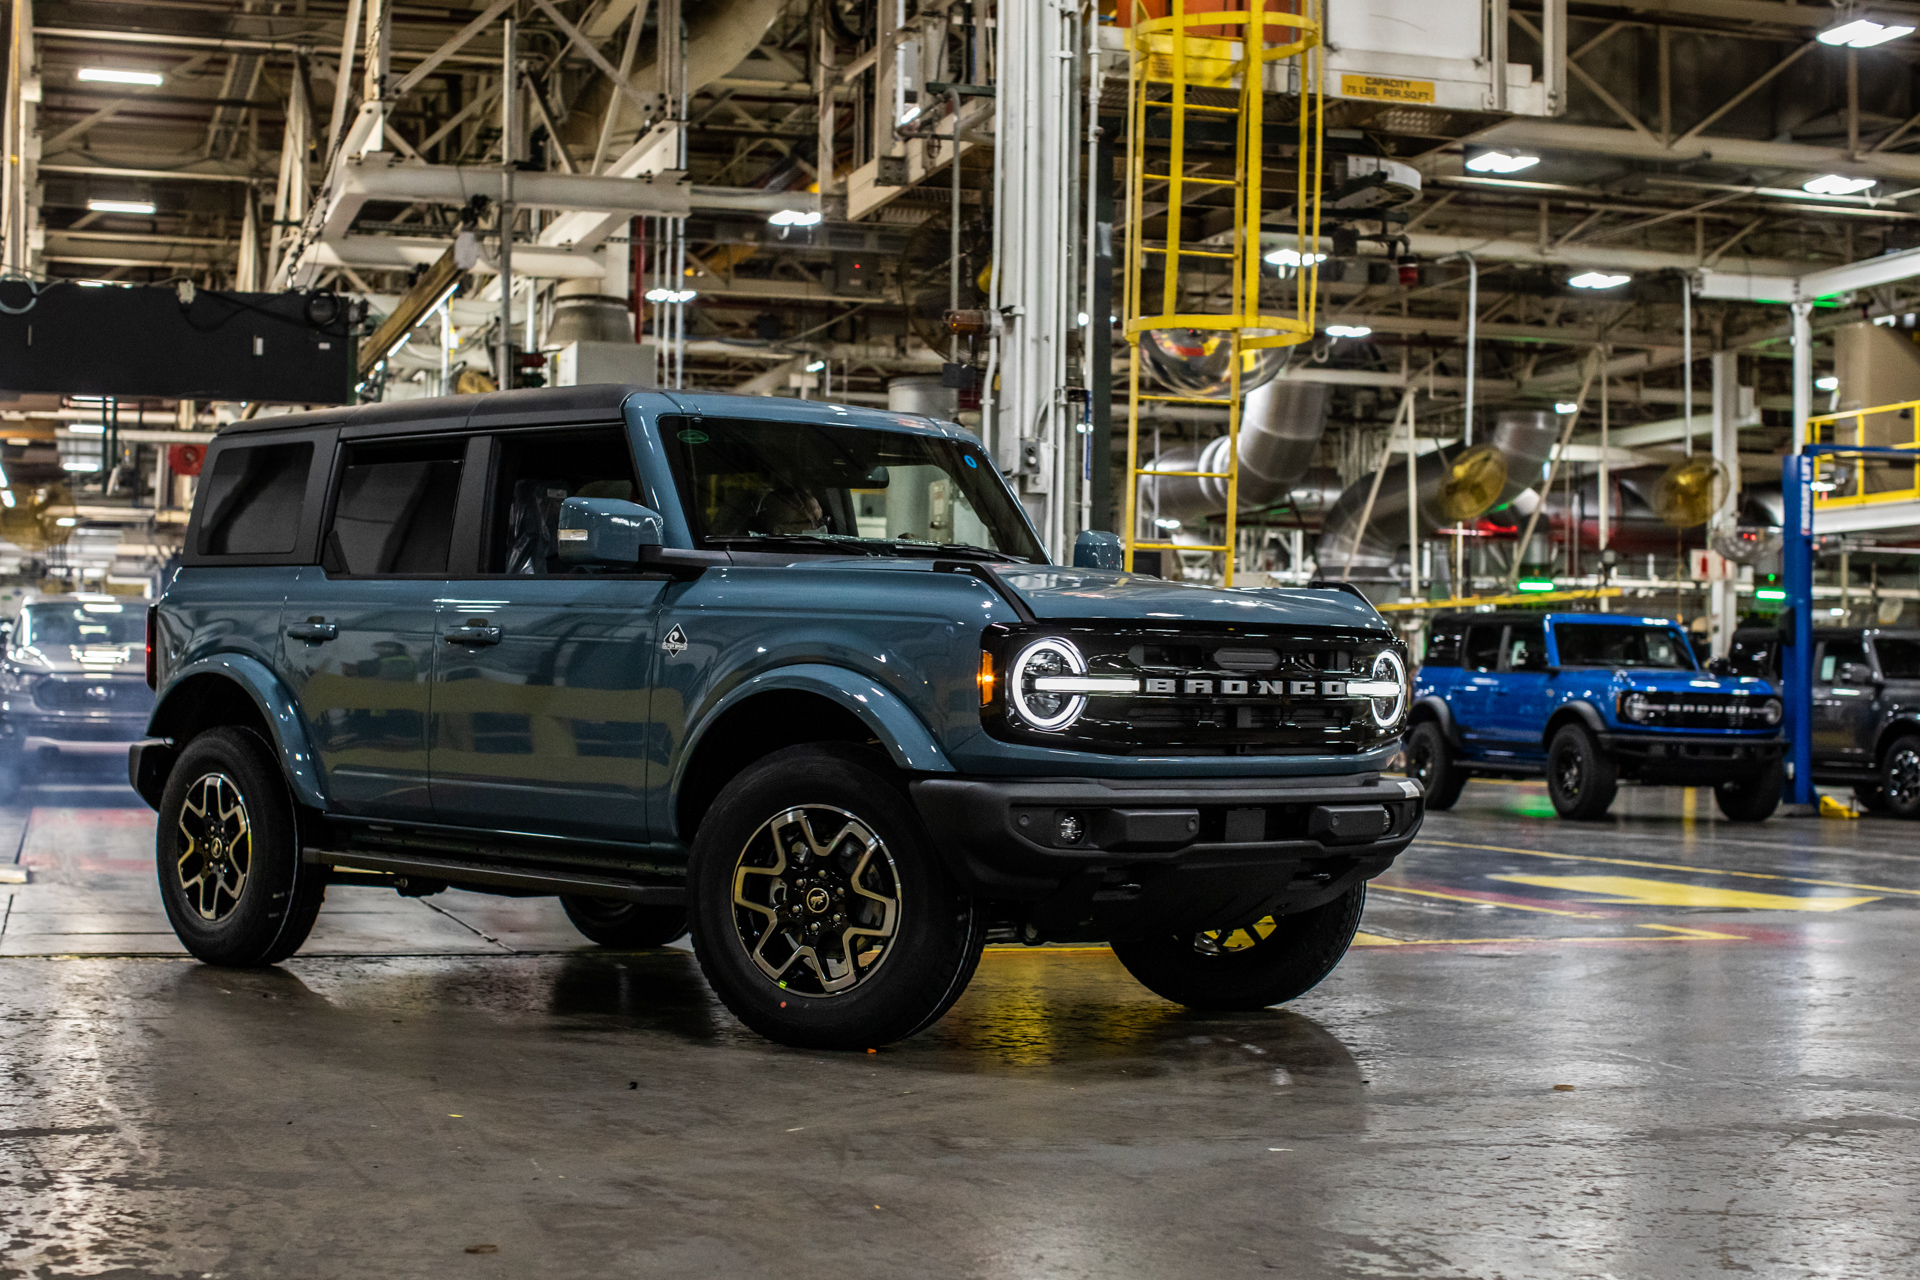 Production of the all-new 2021 Ford Bronco is underway at the Michigan Assembly Plant; the two-door and first ever four-door models are now on their way to Ford dealerships across America